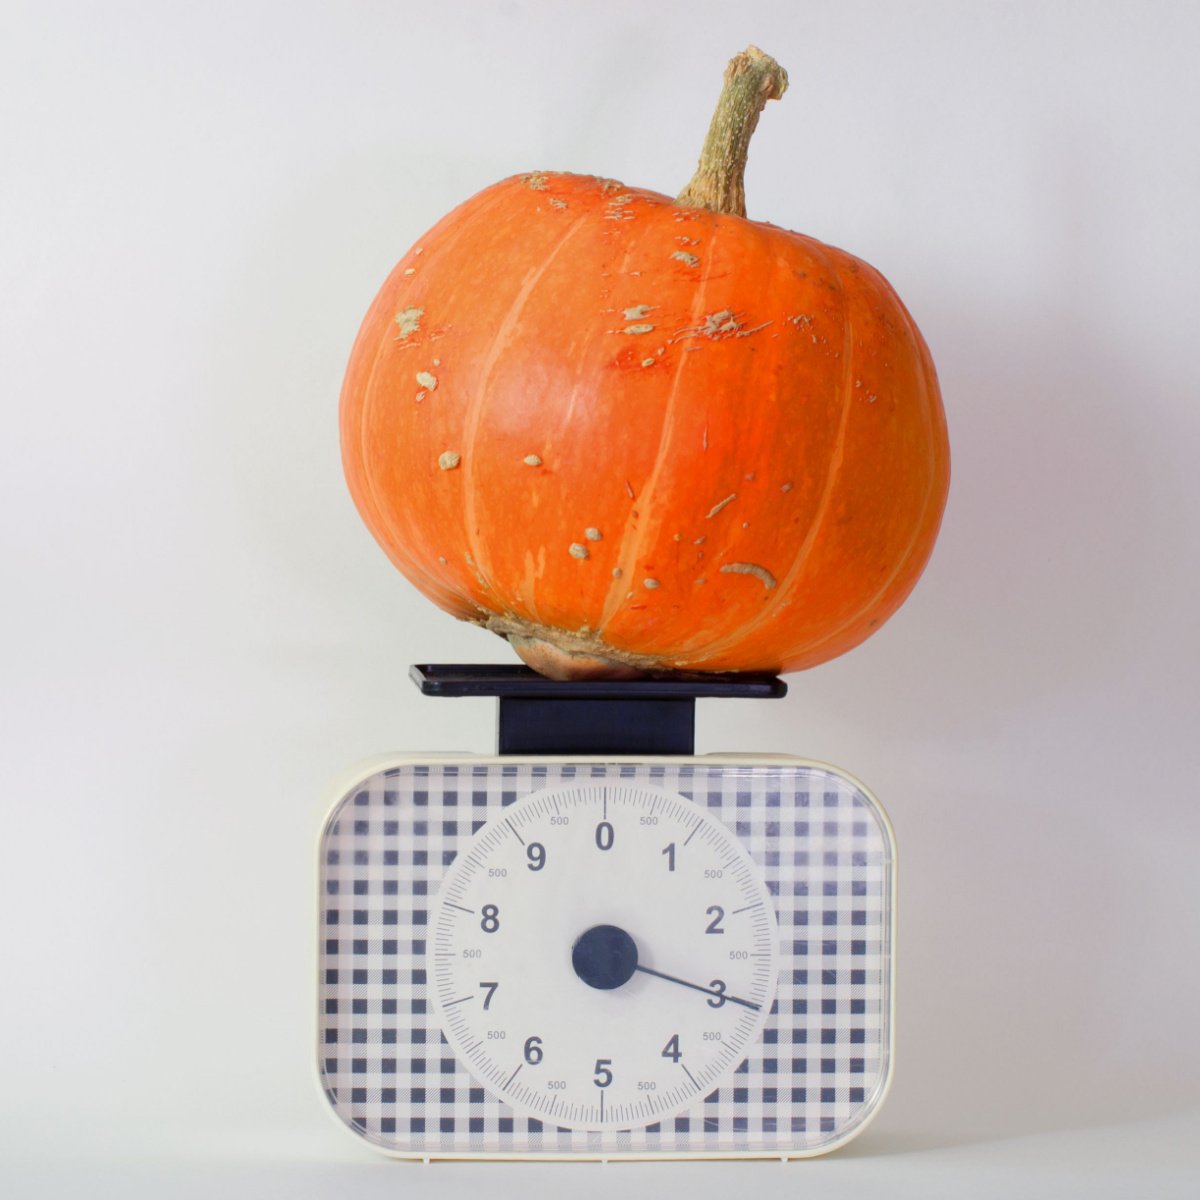 pumpkin on a weighing scale